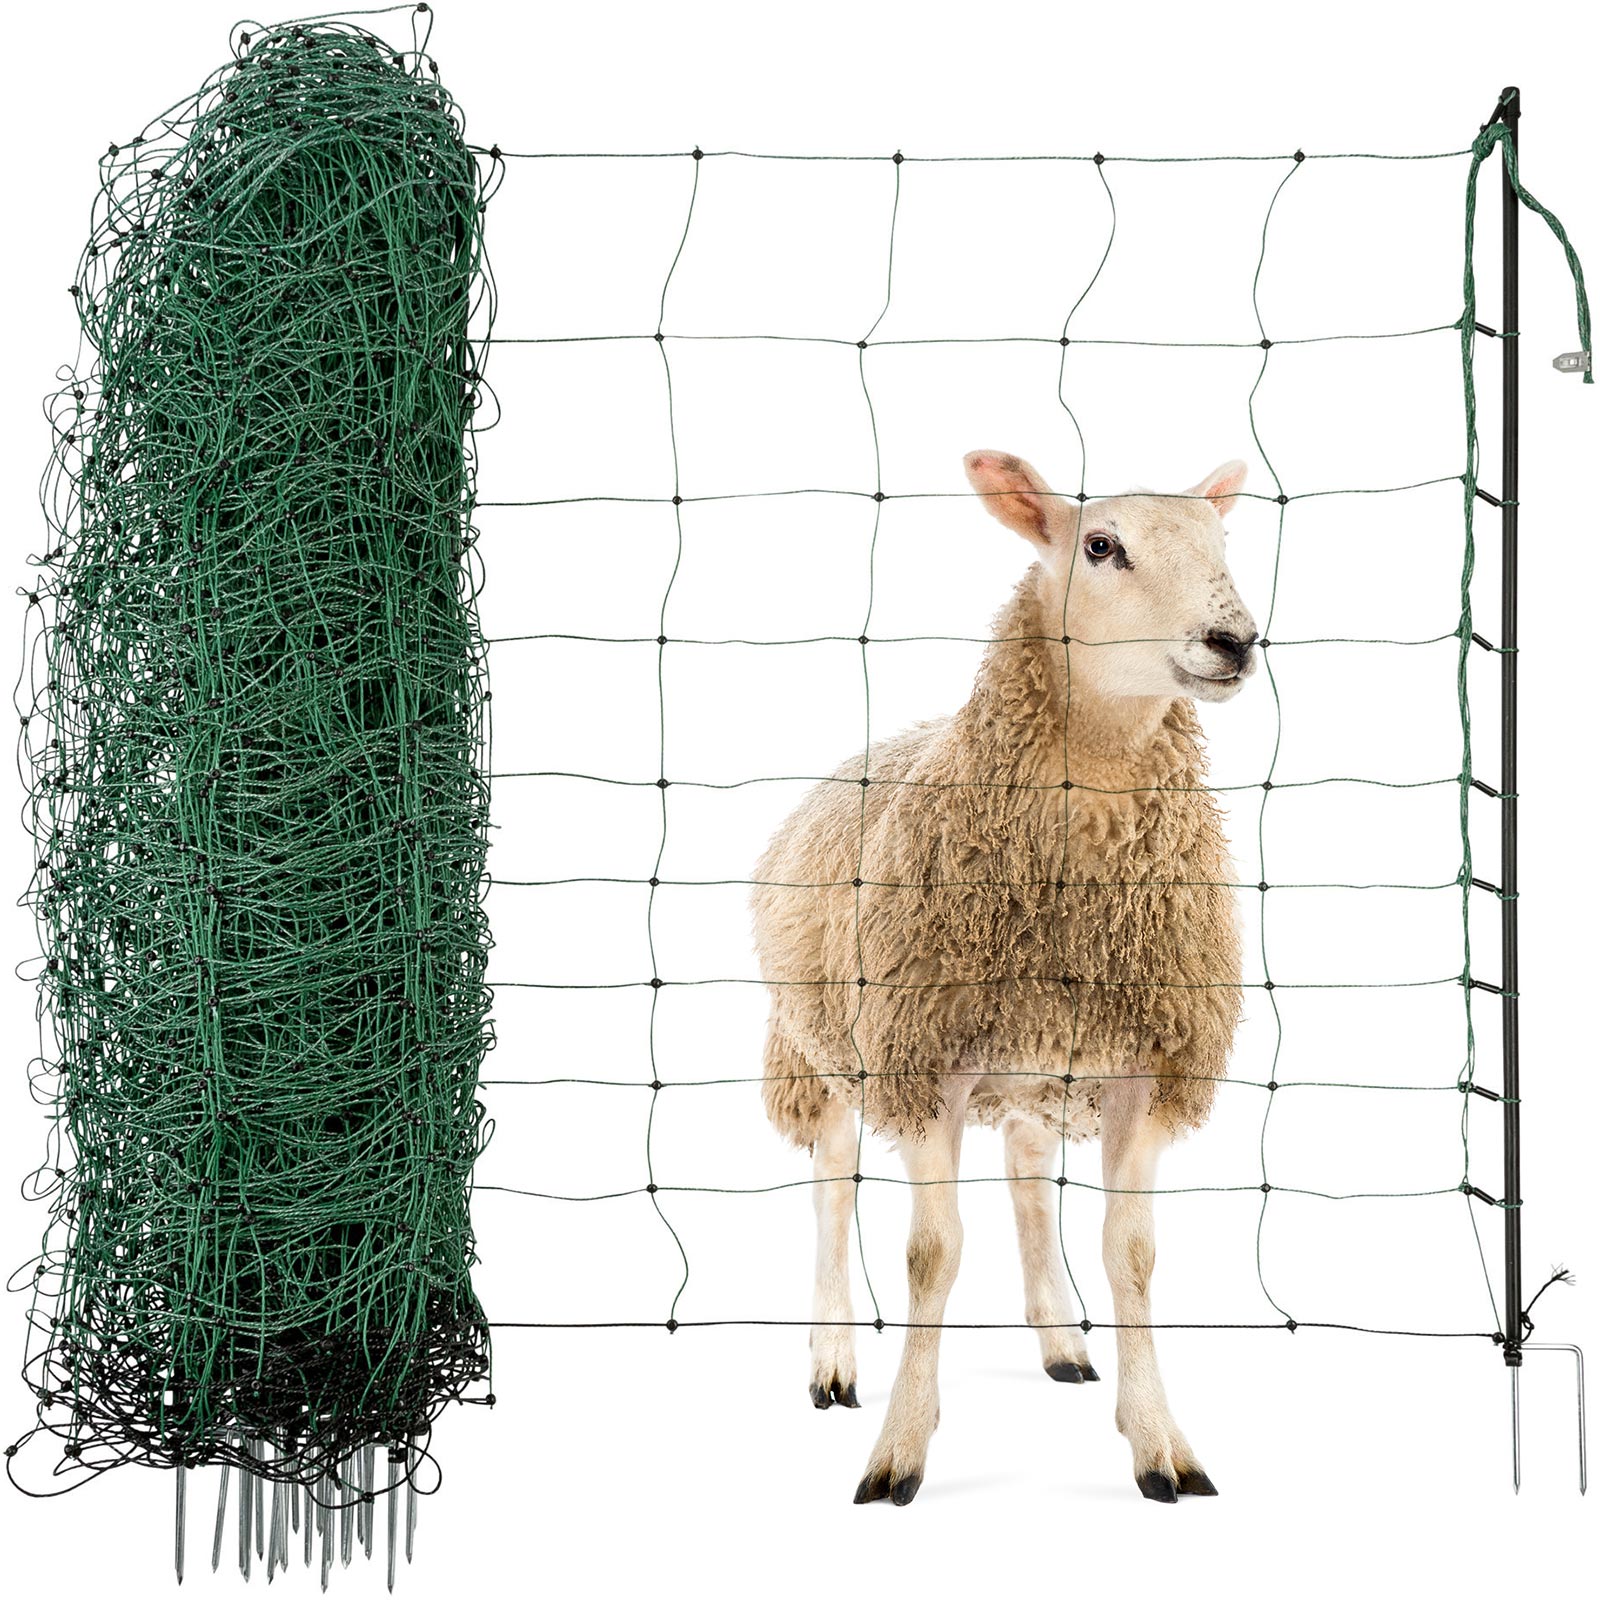 Agrarzone Sheep Net Classic electrificable, double tip, green